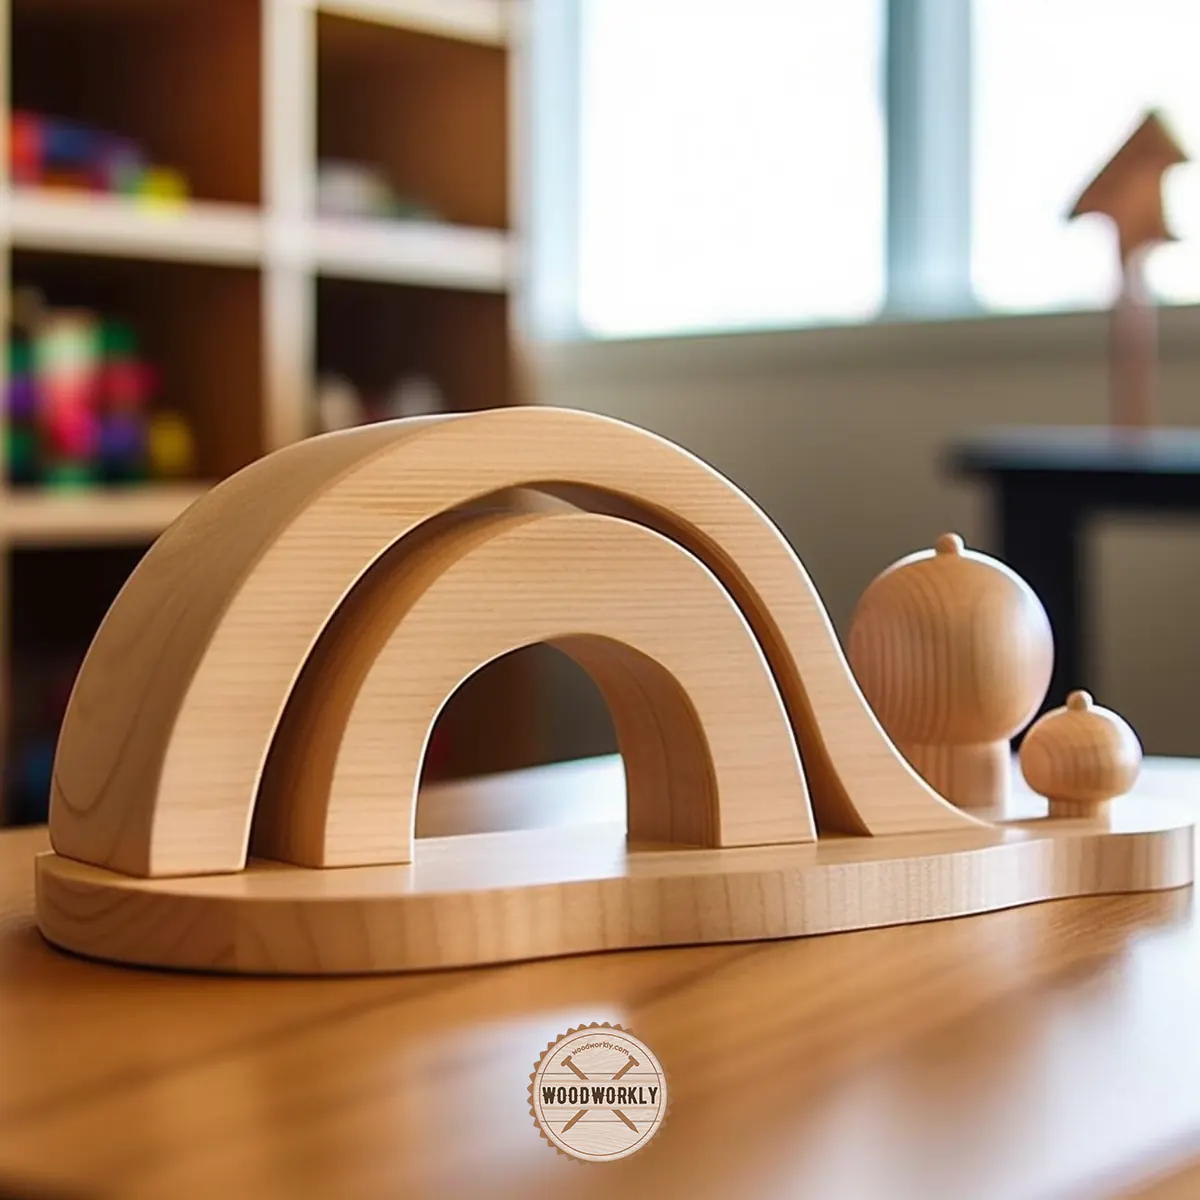 Wooden toy made by bending wood with water